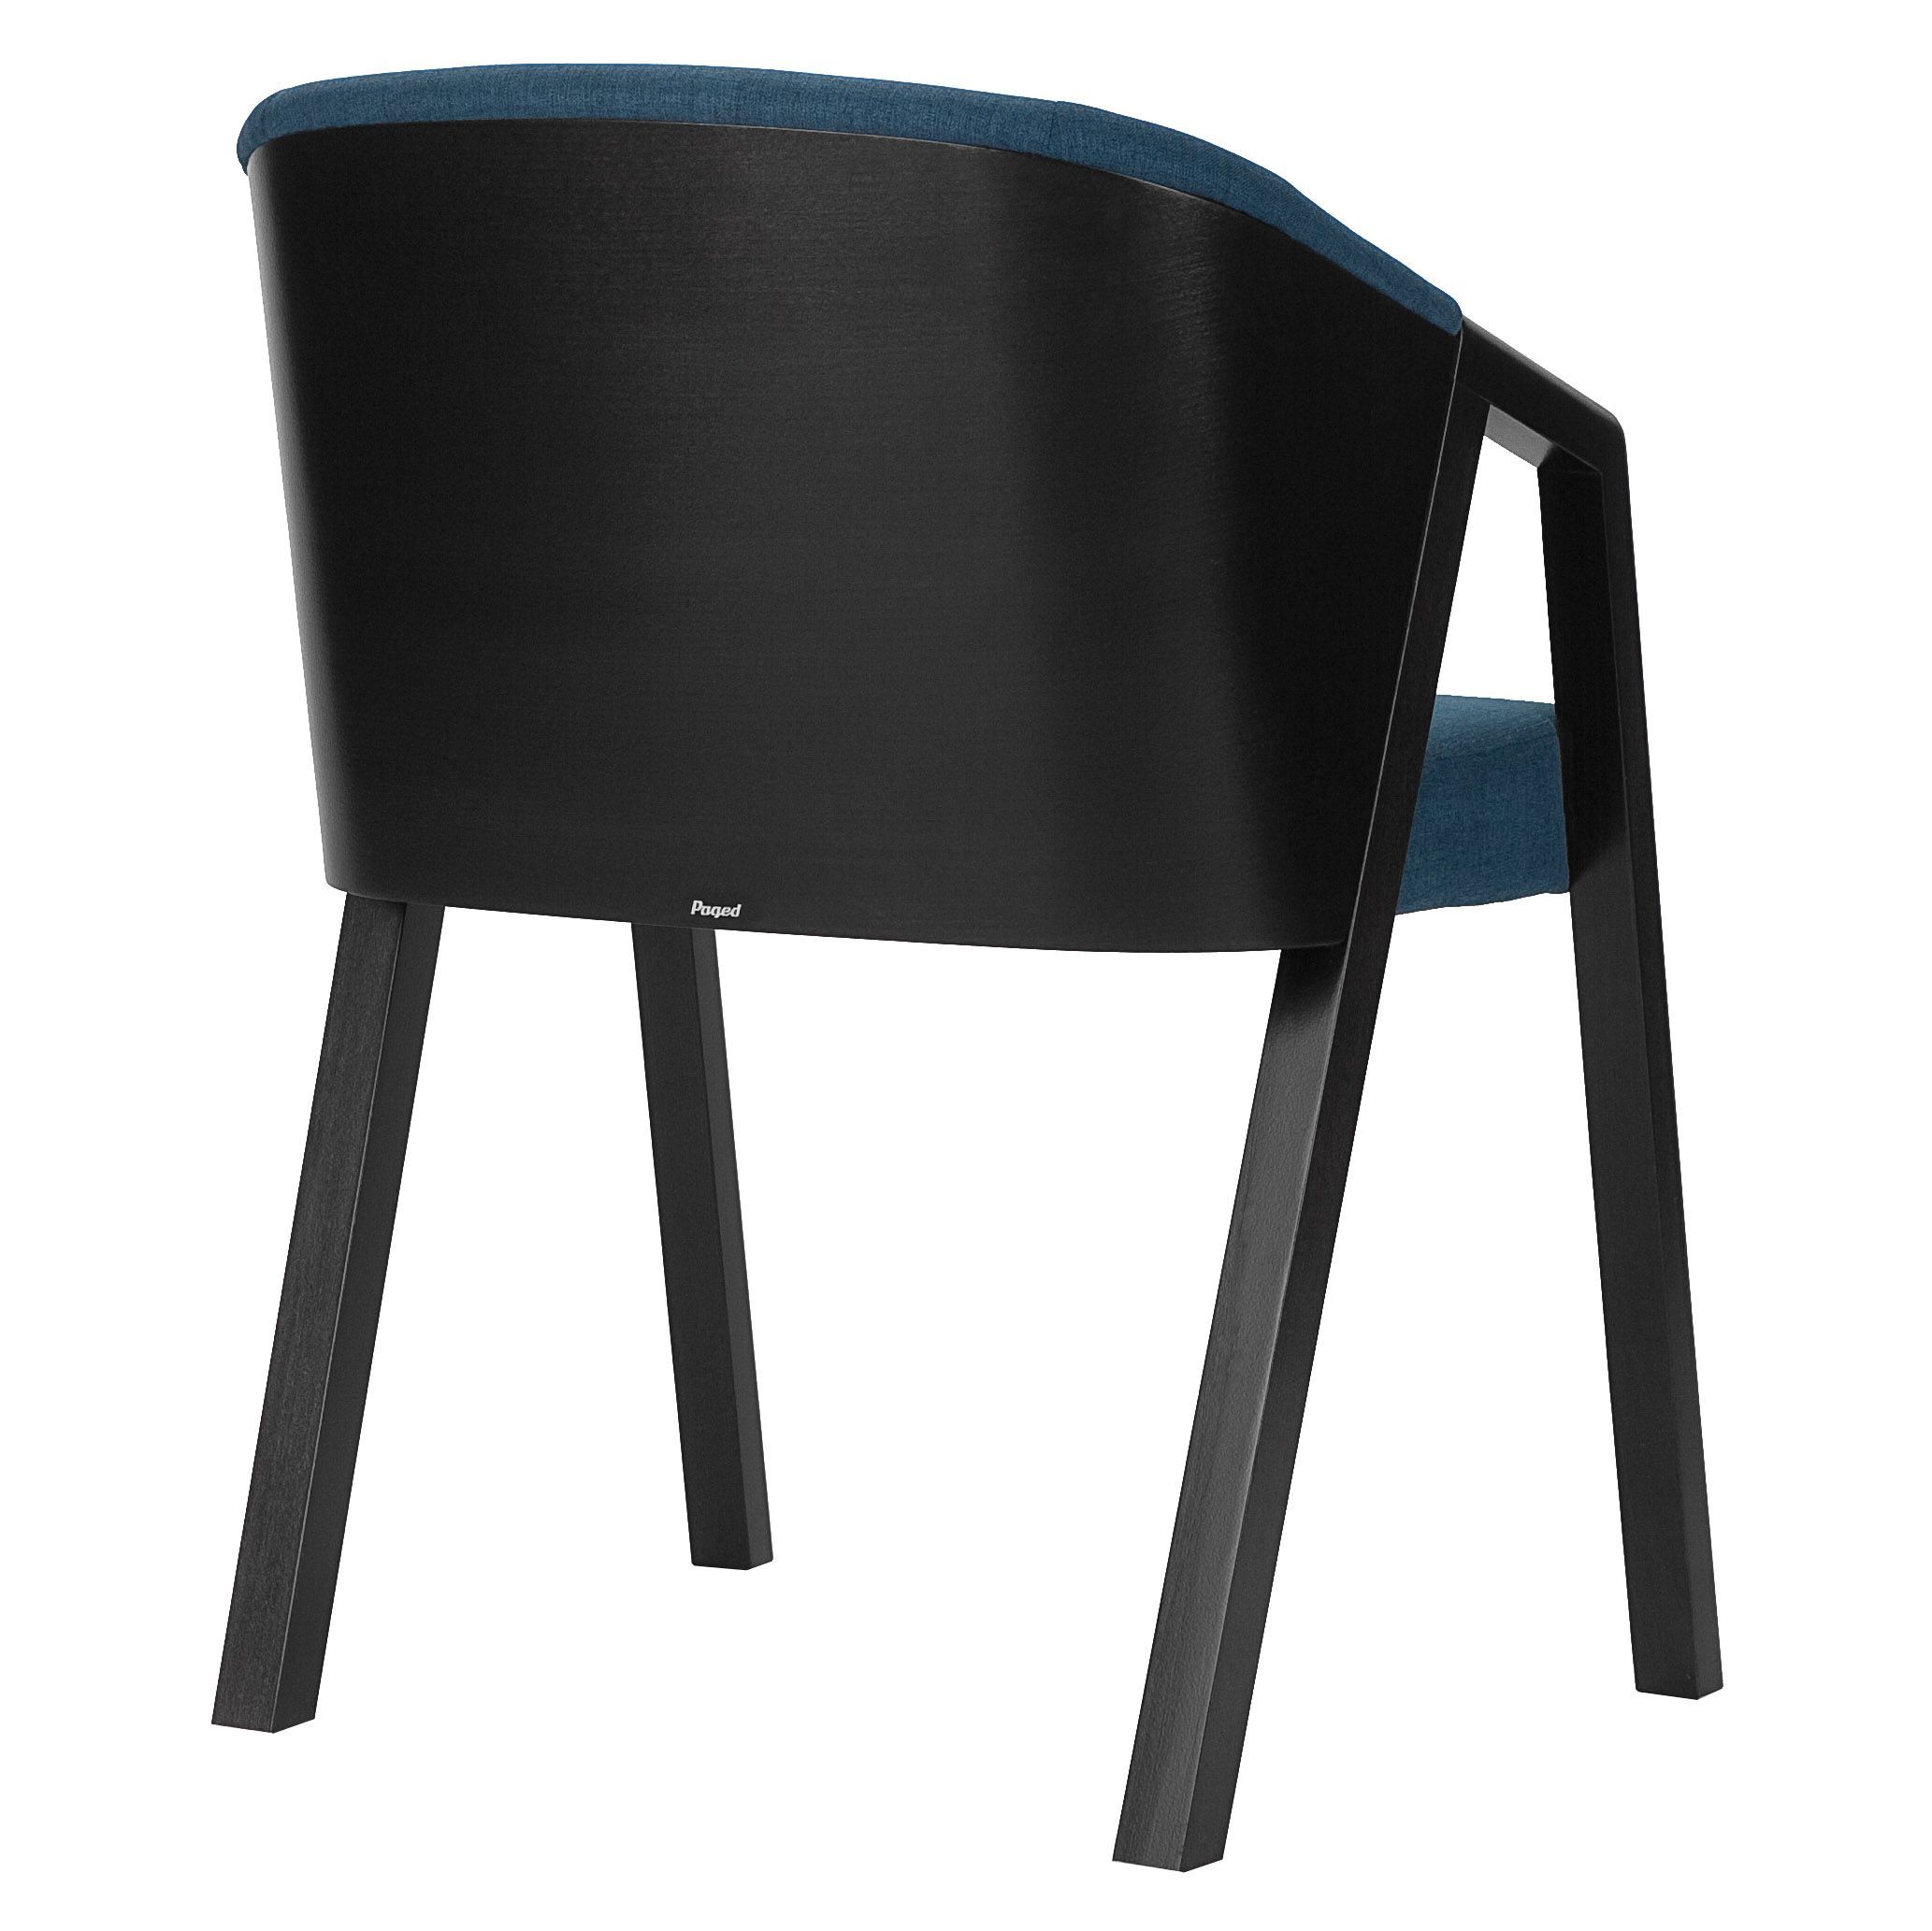 Chair B-Aires W by Paged